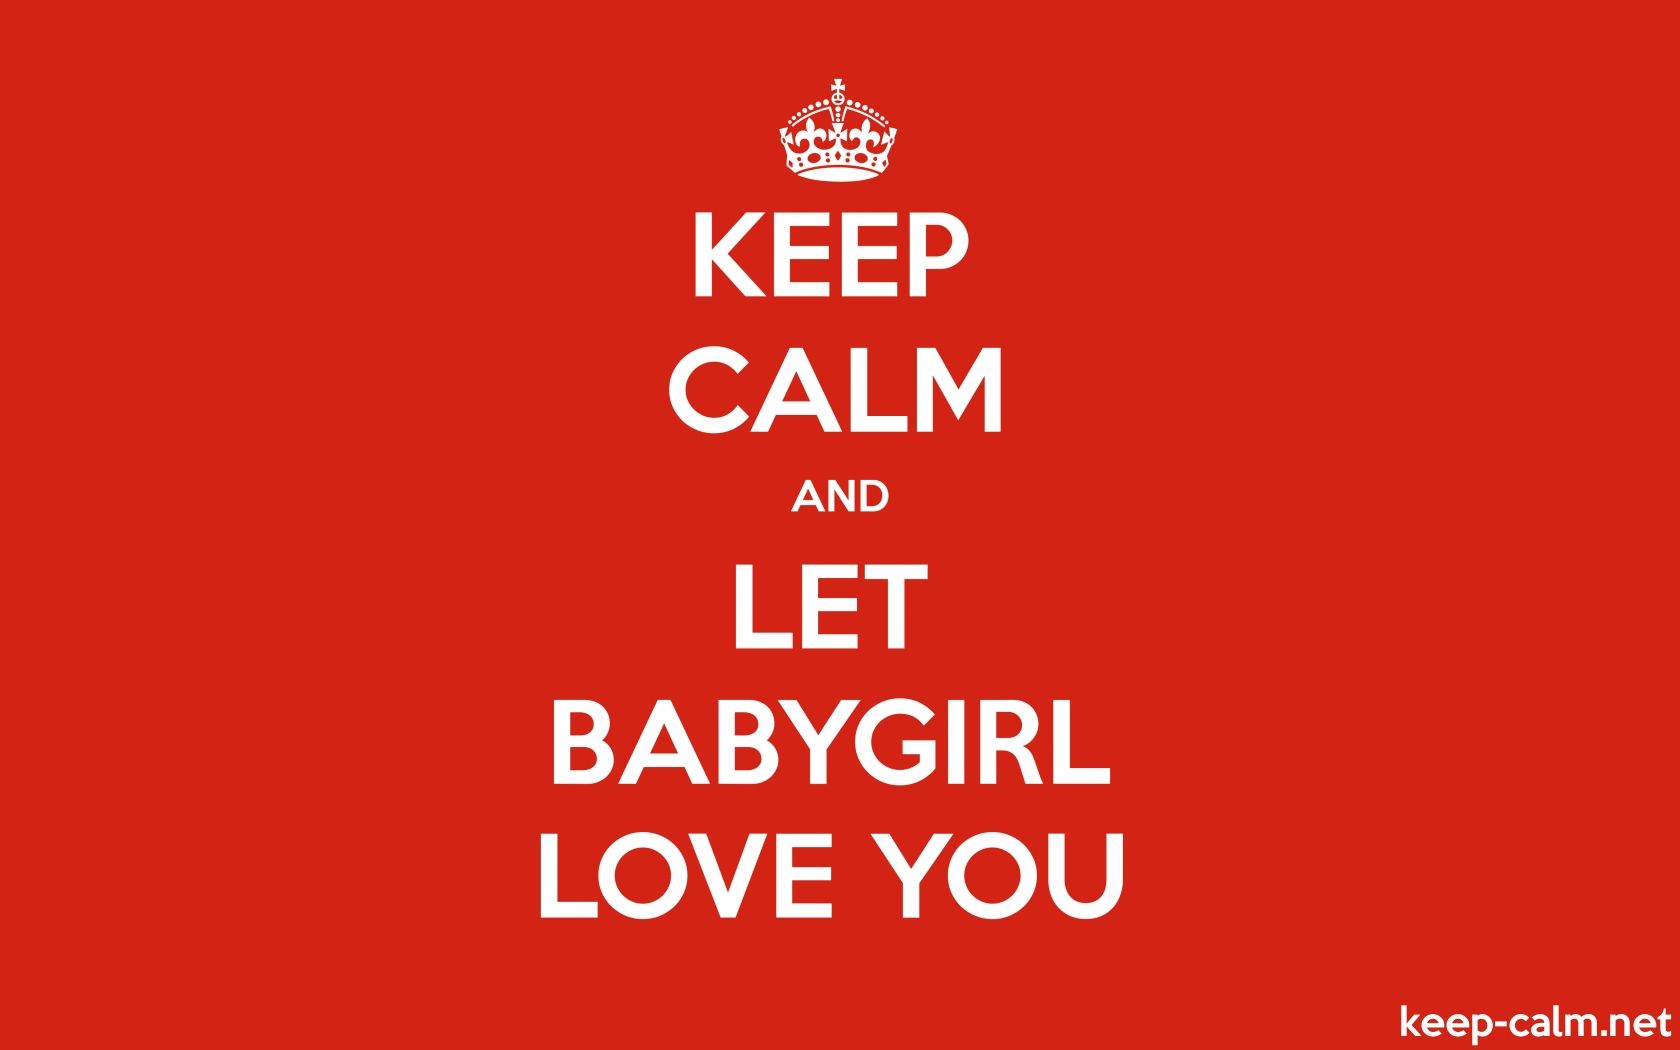 KEEP CALM AND LET BABYGIRL LOVE YOU